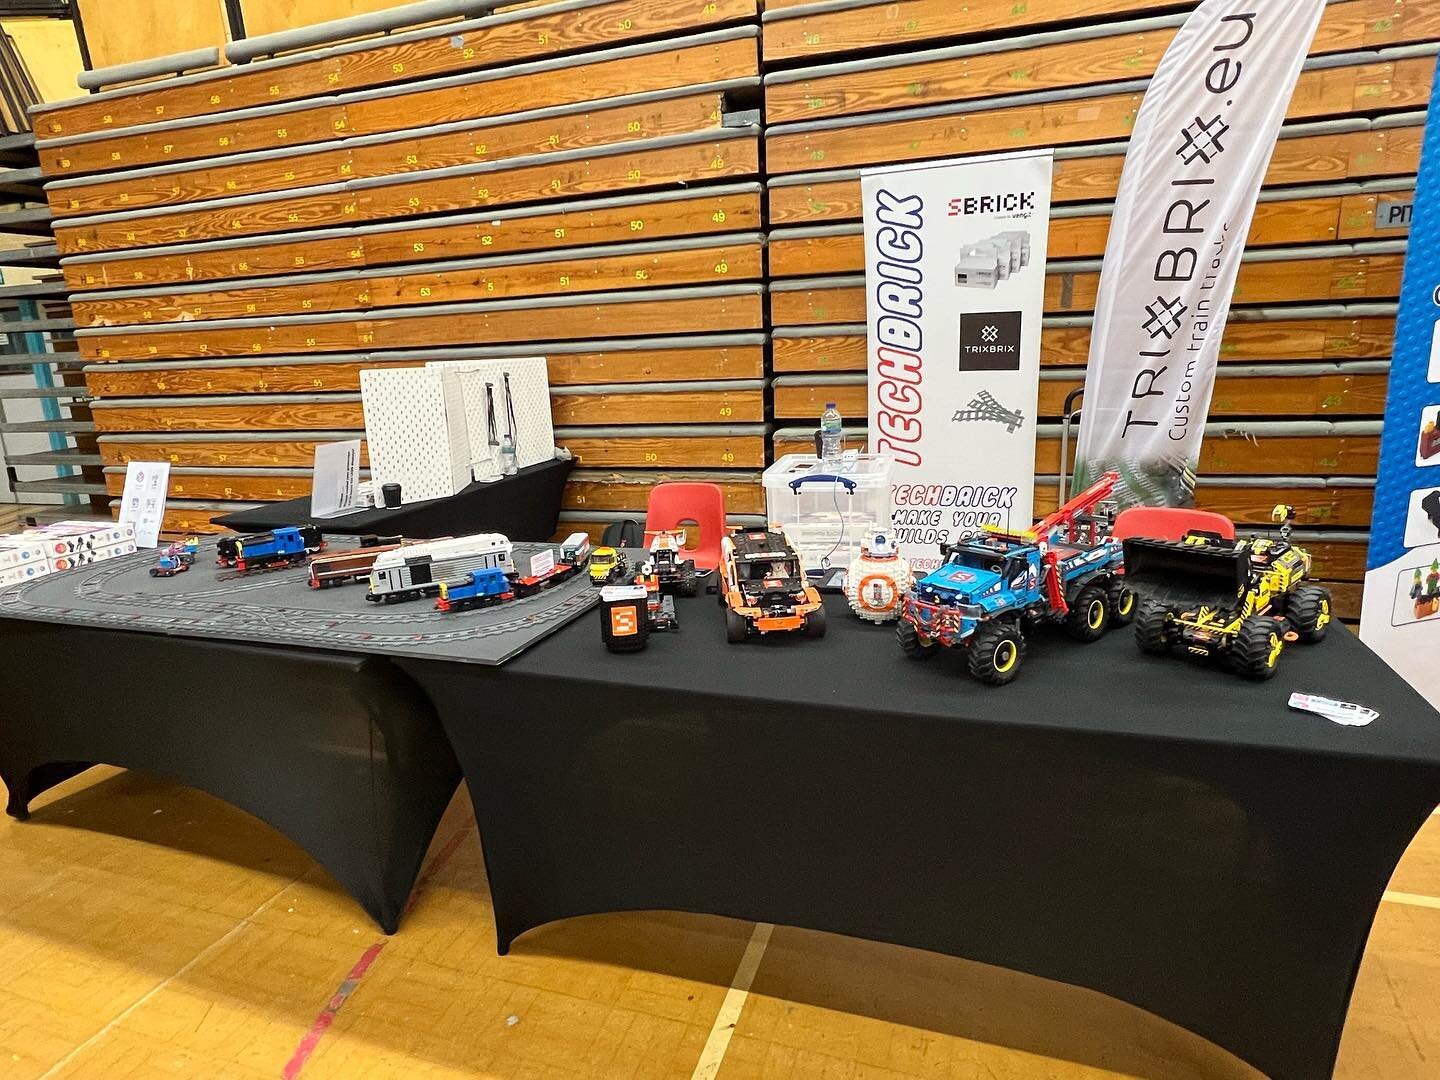 Our first outing of 2022! At the Reading Brick Show. Great to meet so many of our customers and have a chat! #circuitcubes #trixbrix #cada #sbrick #mouldking #lego #legotrains #legotechnic #afol #tfol